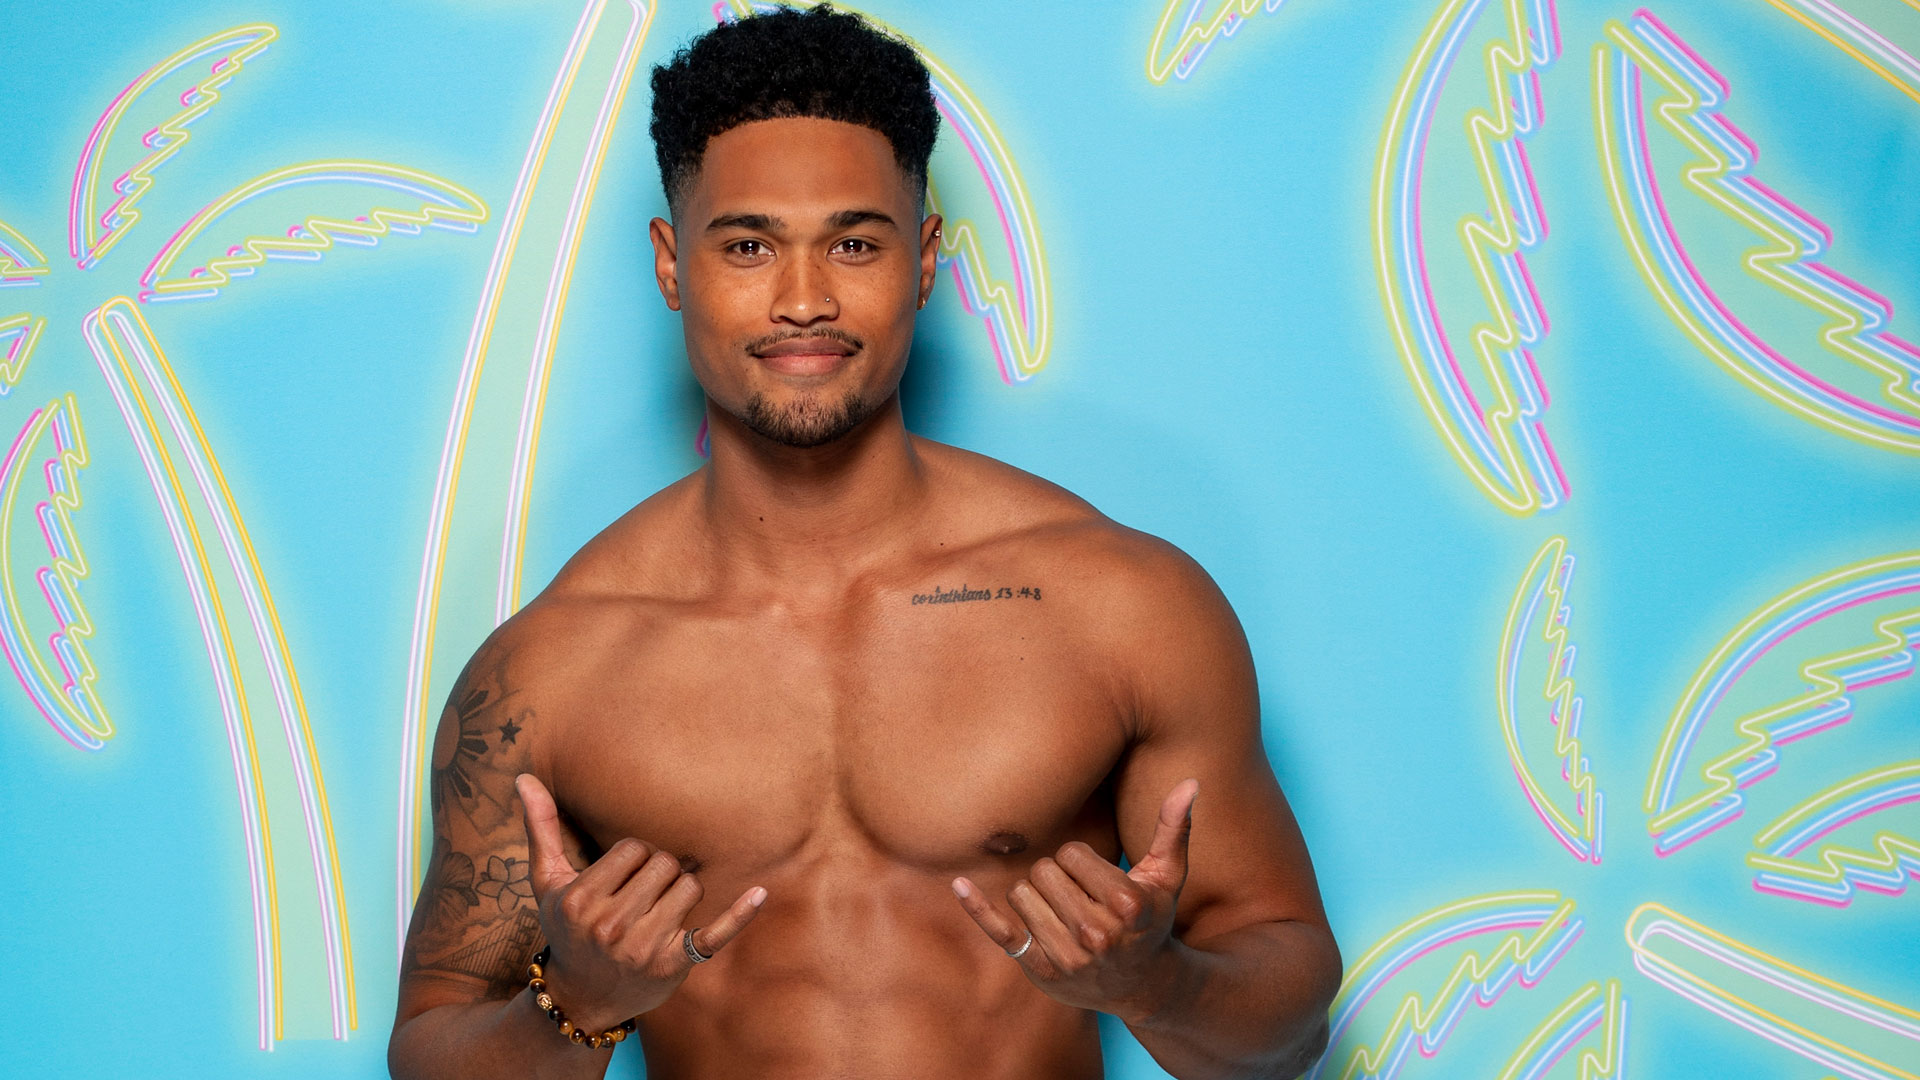 Love island us 2020 starts on itv2 tonight, with a whole new cast of island...